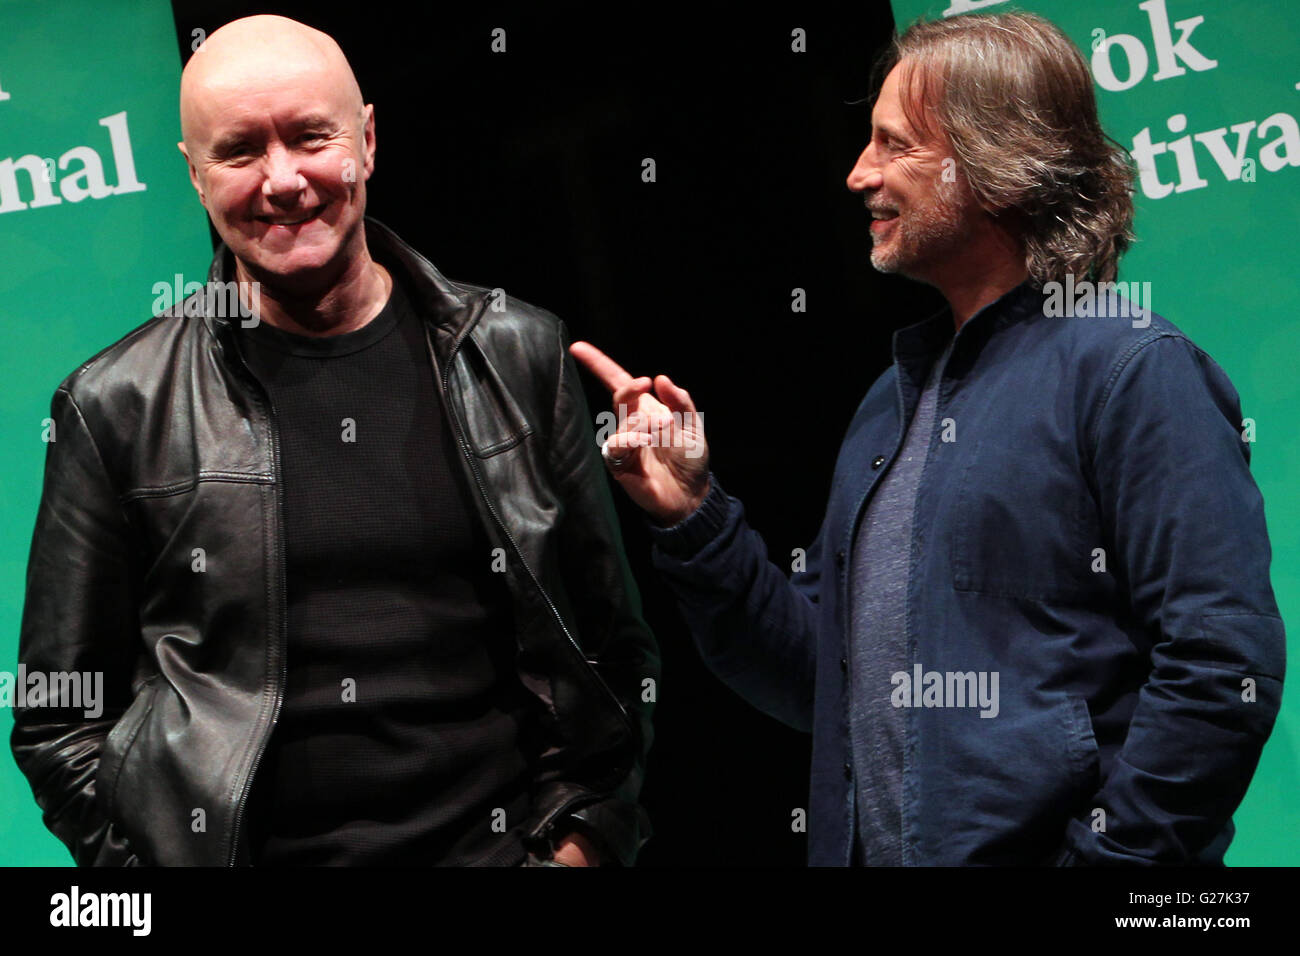 Irvine Welsh and actor Robert Carlyle pose for a picture at the Usher Hall Edinburgh ahead of them taking part in an event at the Edinburgh International Book Festival.  Featuring: Irvine Welsh and actor Robert Carlyle pose for a picture at the Usher Hall Stock Photo